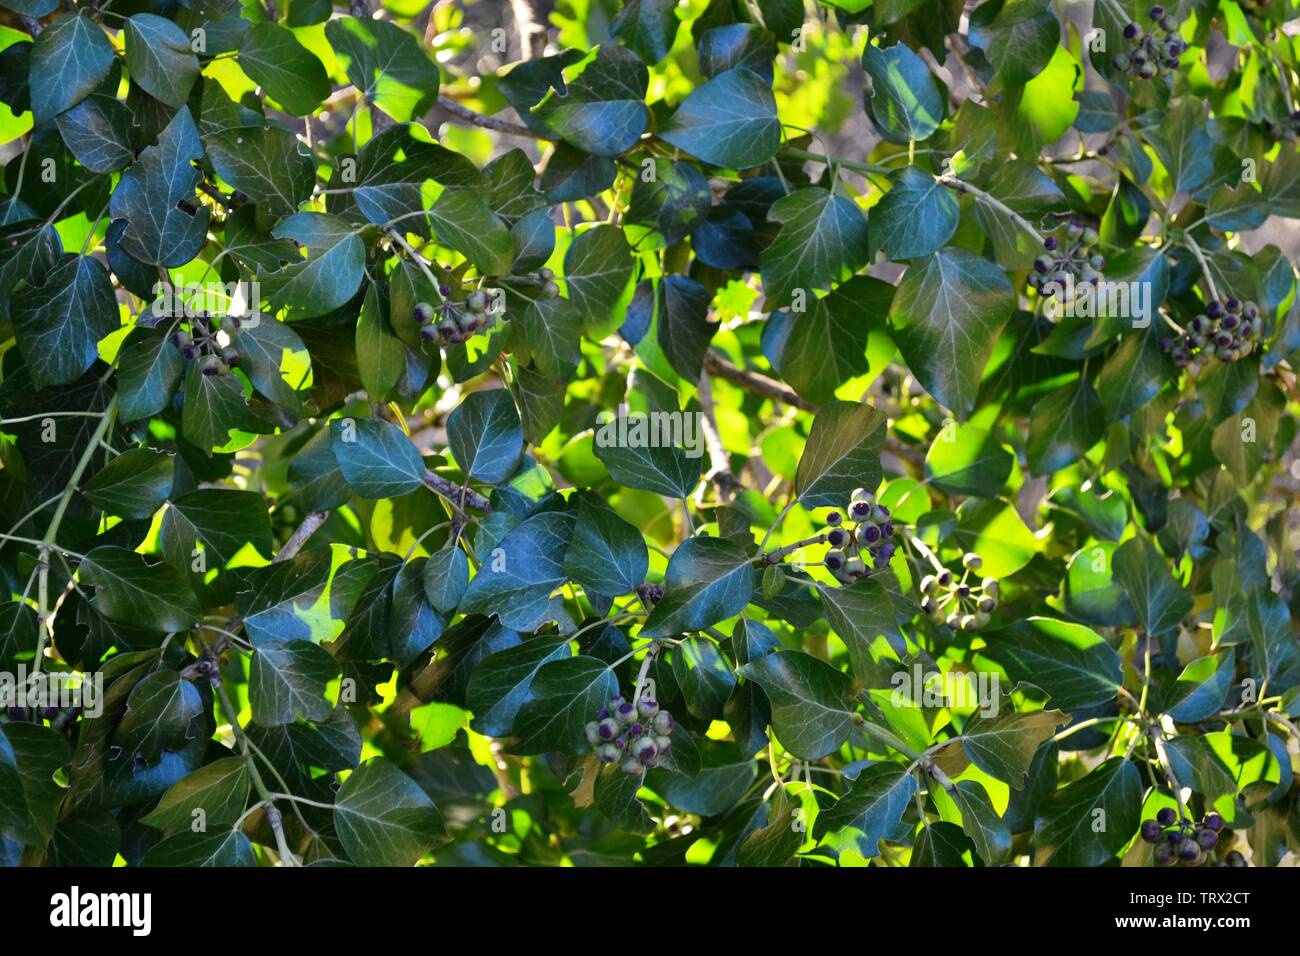 Ivy wall of Hedera Helix with blue fruits illuminated by sunlight in background. Stock Photo